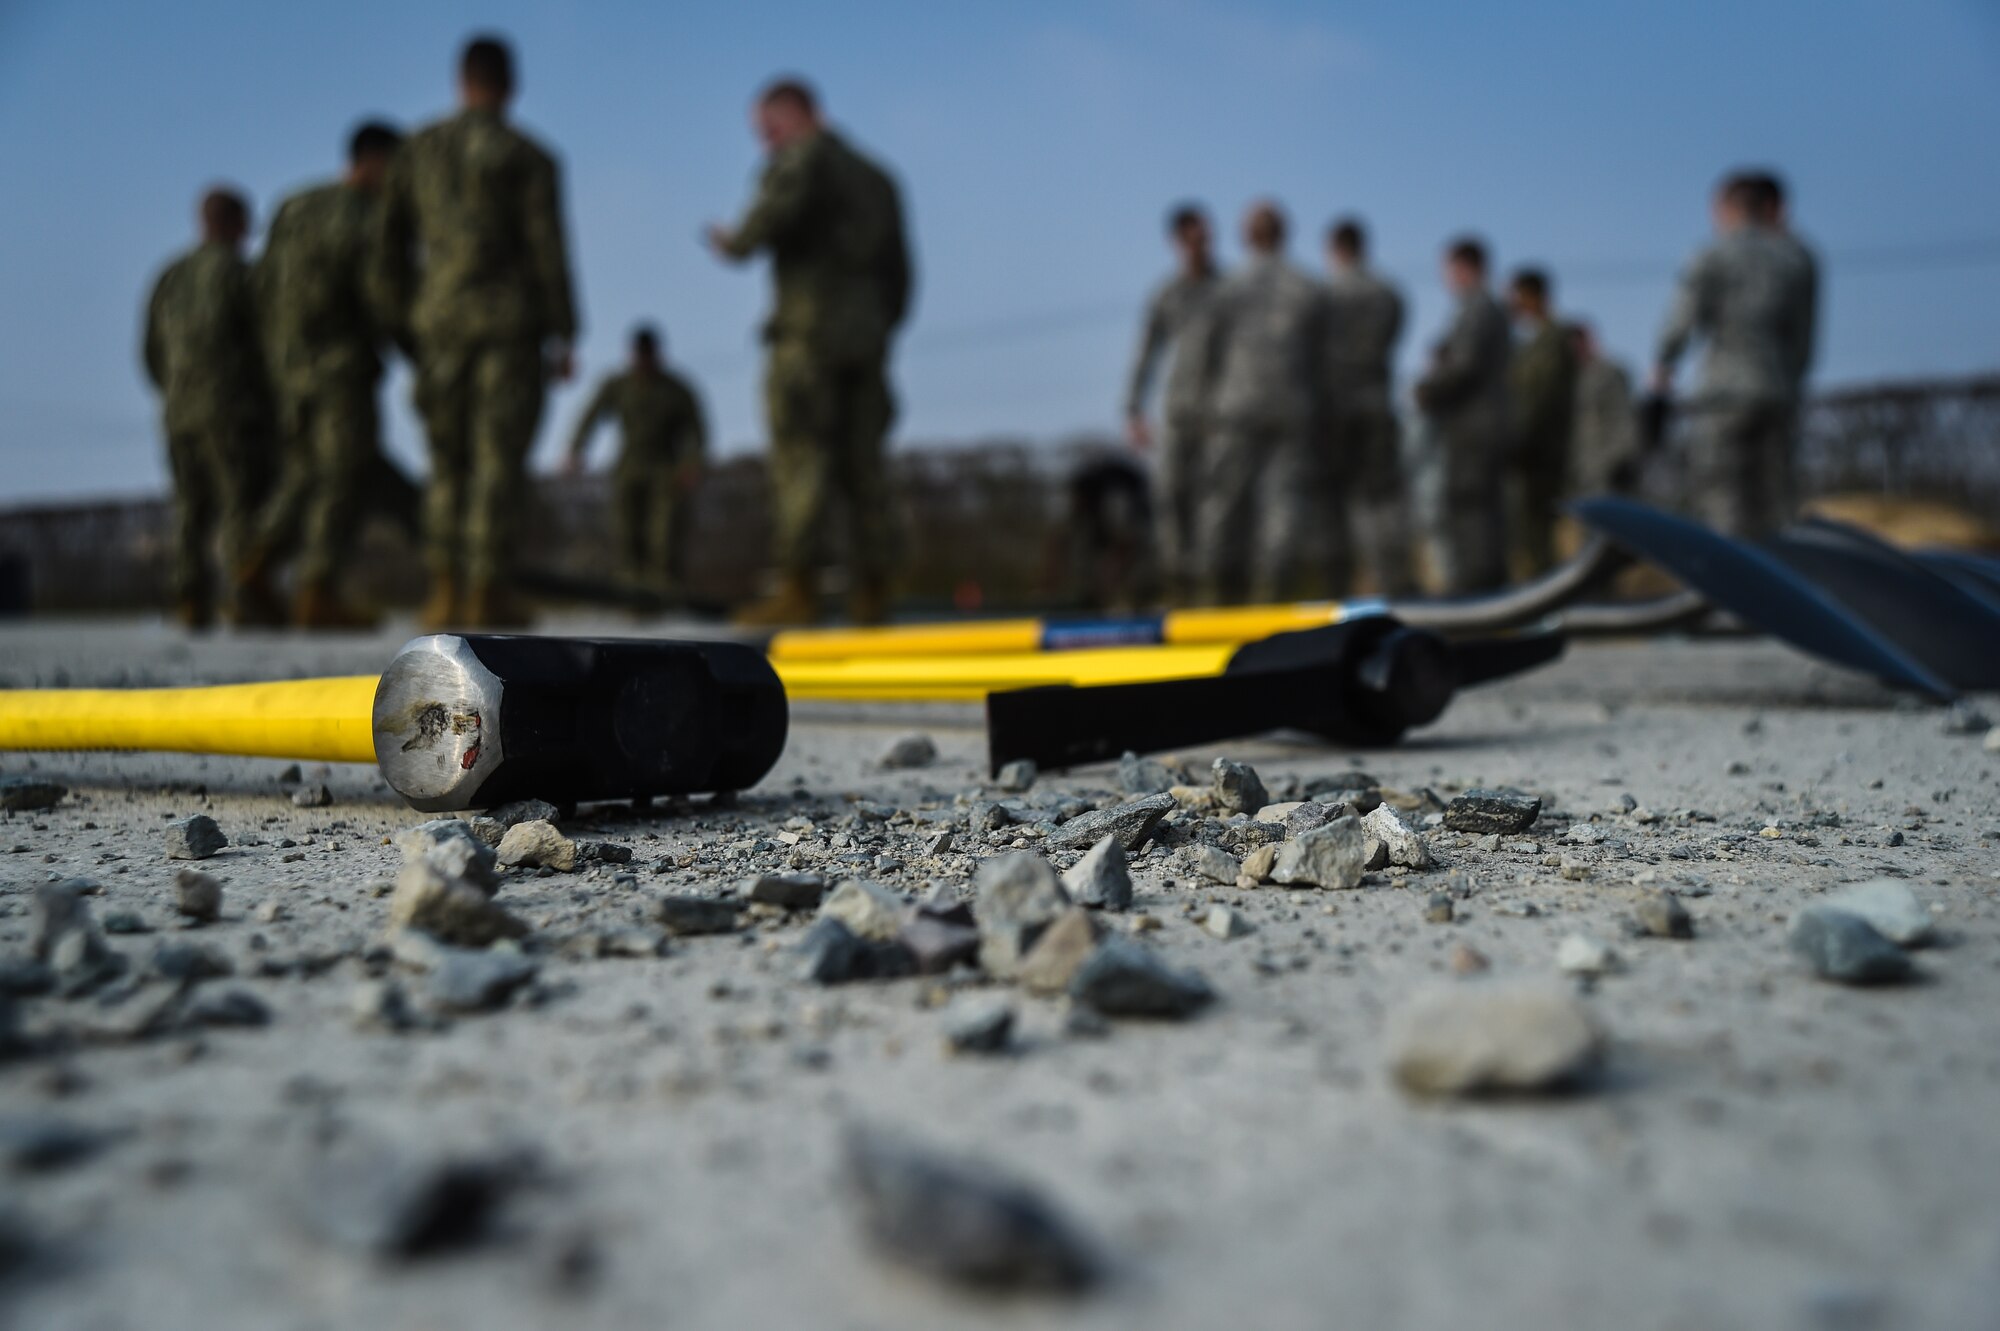 Tools are aligned on a mock airstrip during a Rapid Airfield Damage Repair bilateral training exercise at Gwangju Air Base, Republic of Korea, Nov. 8, 2017. U.S. and R.O.K. Airmen trained together for a week to learn the new RADR process, preparing them for response to wartime contingencies, enhancing interoperability and building partnership capacity in the Indo-Asia Pacific region. (U.S. Air Force photo by Senior Airman Curt Beach)